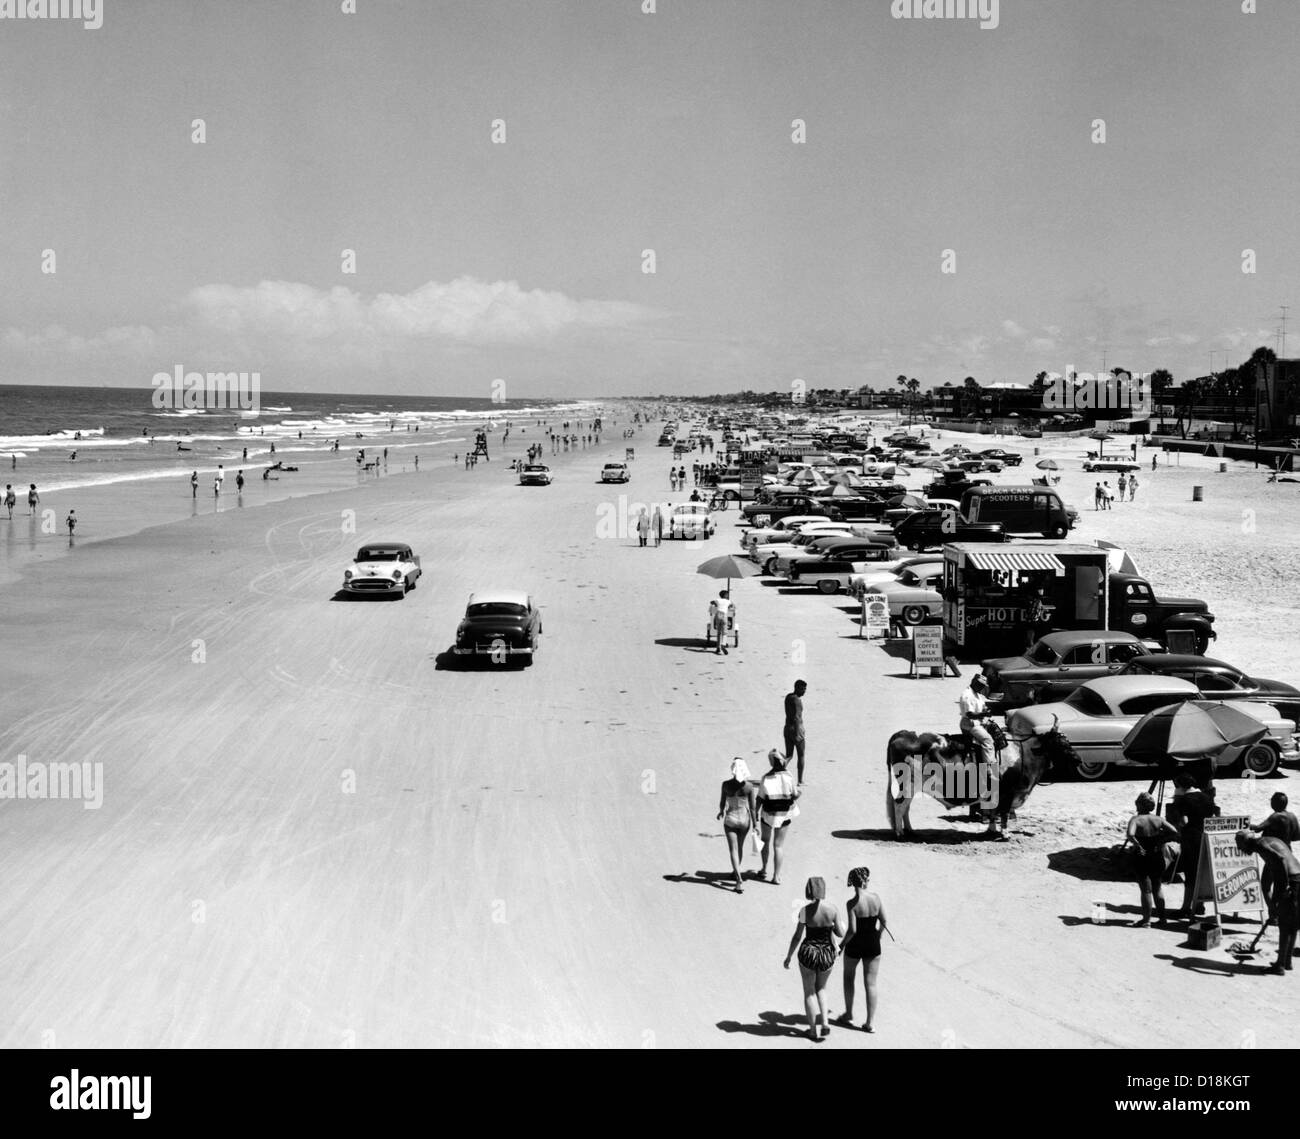 Daytona Beach is 23-mile-long and 600 feet wide. It's smooth, compacted sand attracted vehicles of all types. June 27, 1960. Stock Photo